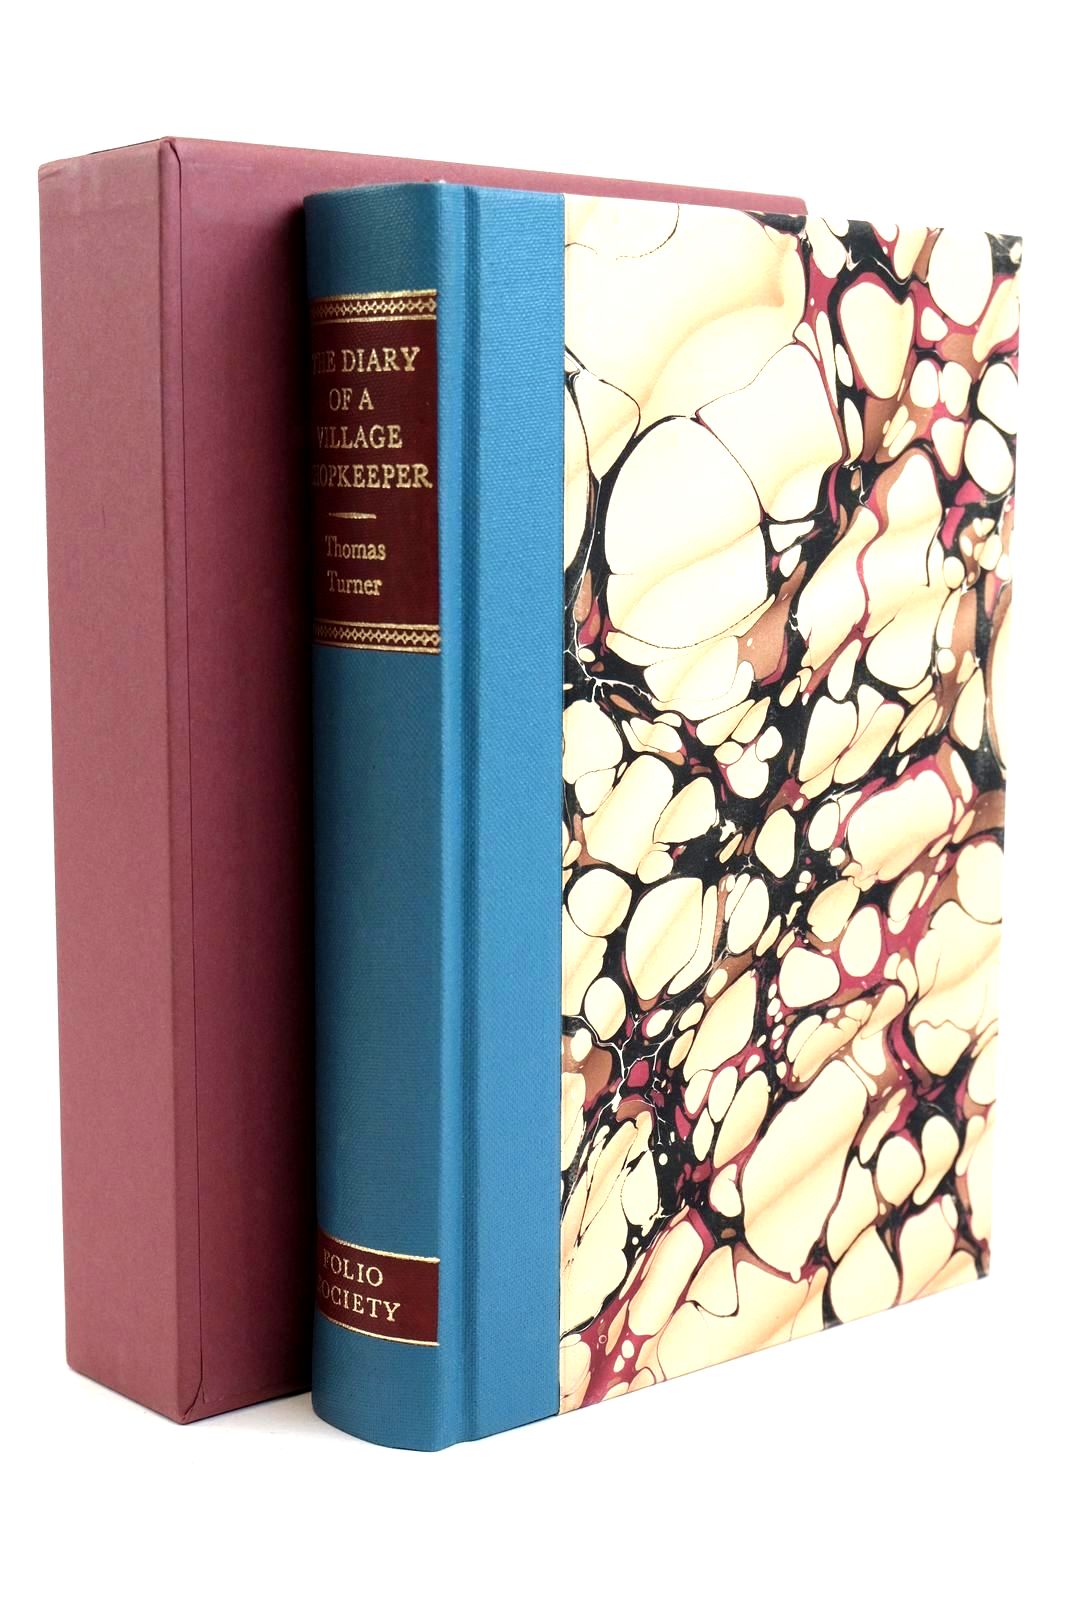 Photo of THE DIARY OF A VILLAGE SHOPKEEPER 1754-1765 written by Turner, Thomas
Vaisey, David illustrated by Macgregor, Miriam published by Folio Society (STOCK CODE: 1320467)  for sale by Stella & Rose's Books